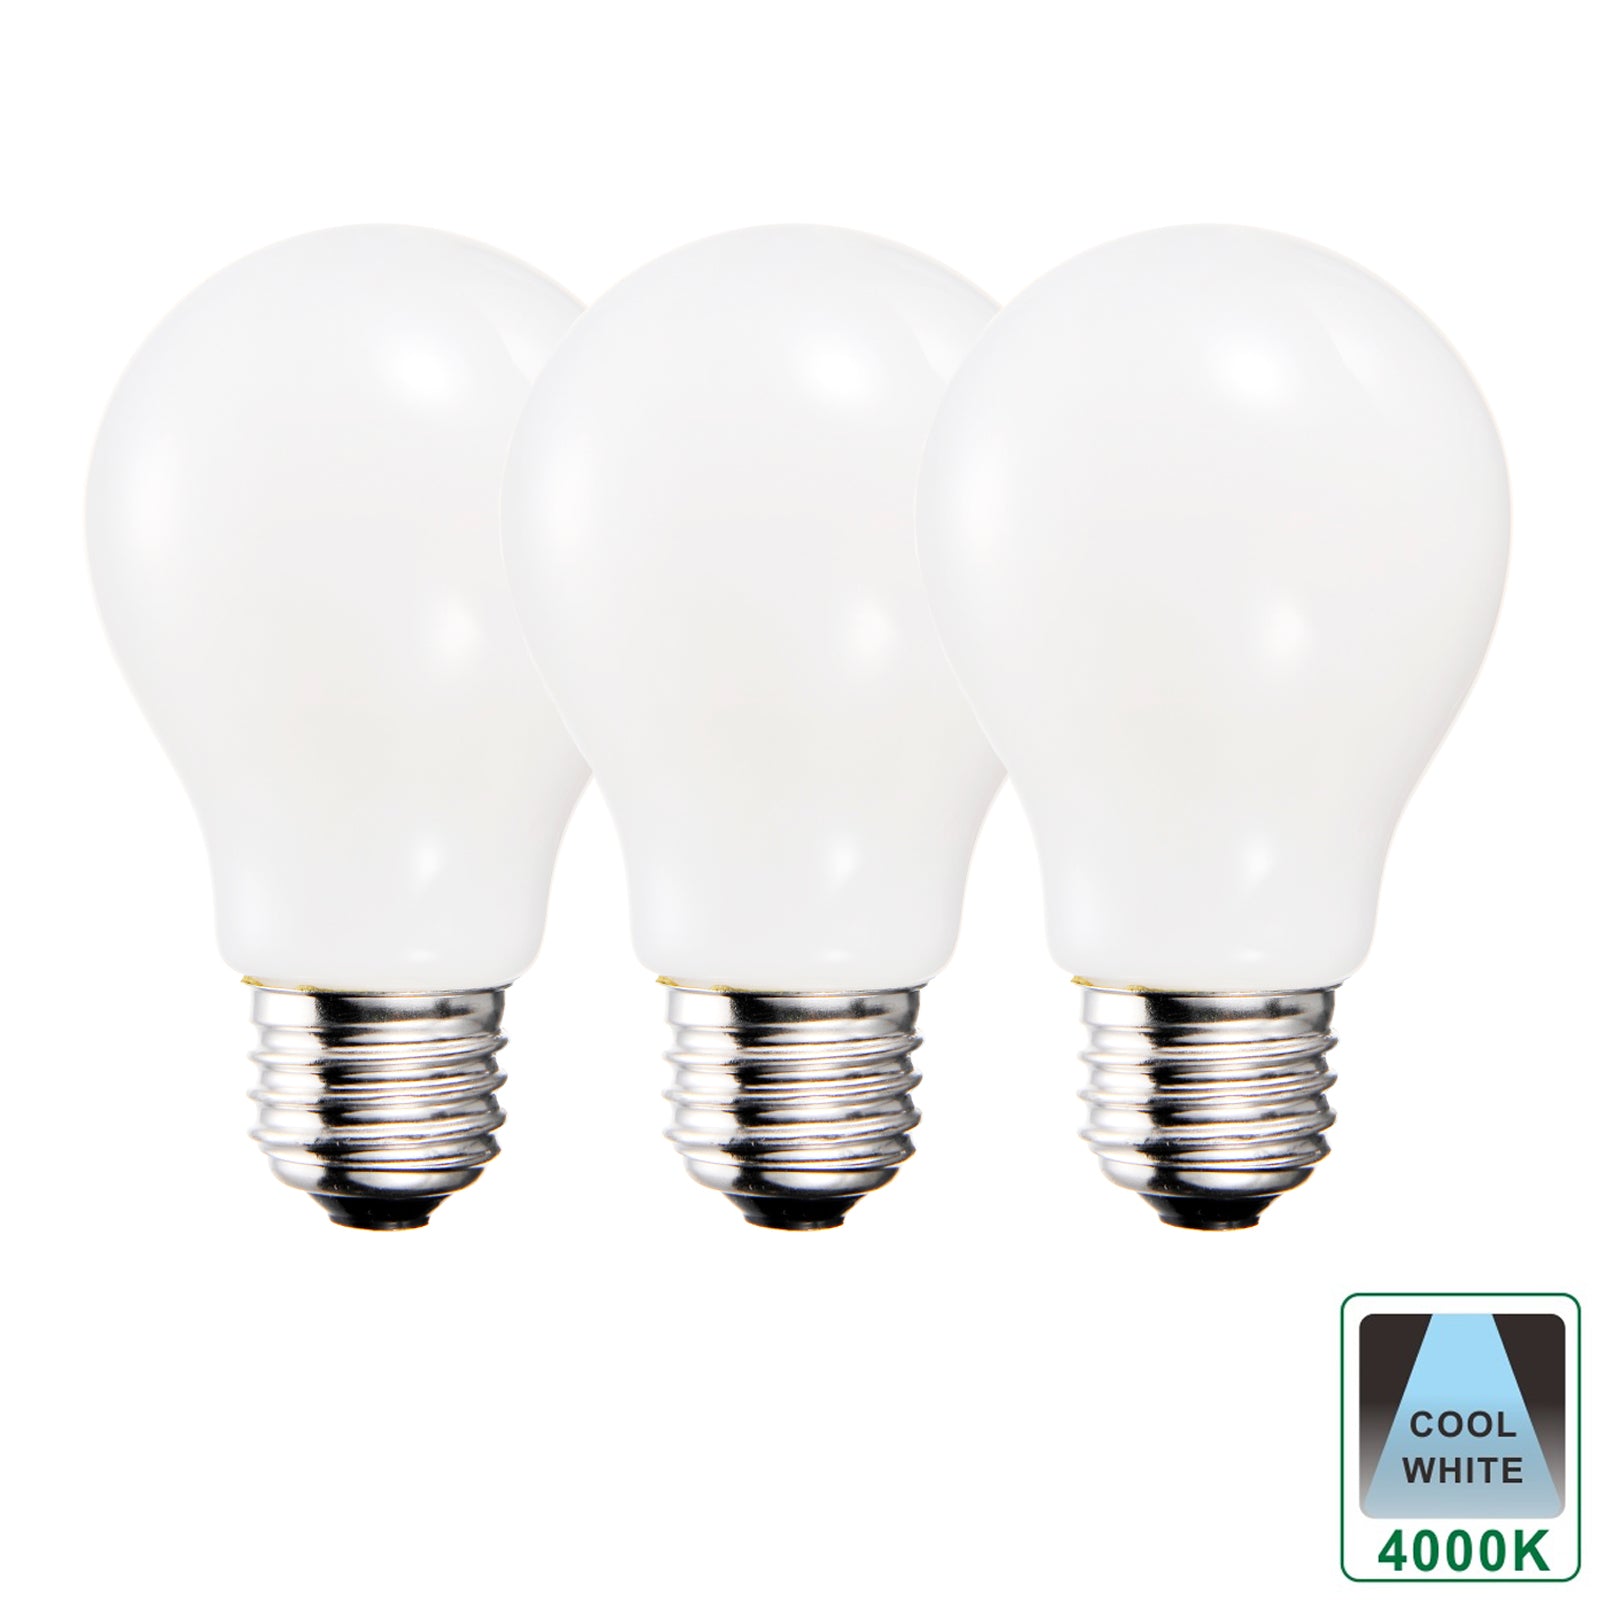 E27 8.5 Watts Dimmable LED GLS/A60 Standard Light Bulb, Opal Finish Cool White Packs of 3, 5 and 10